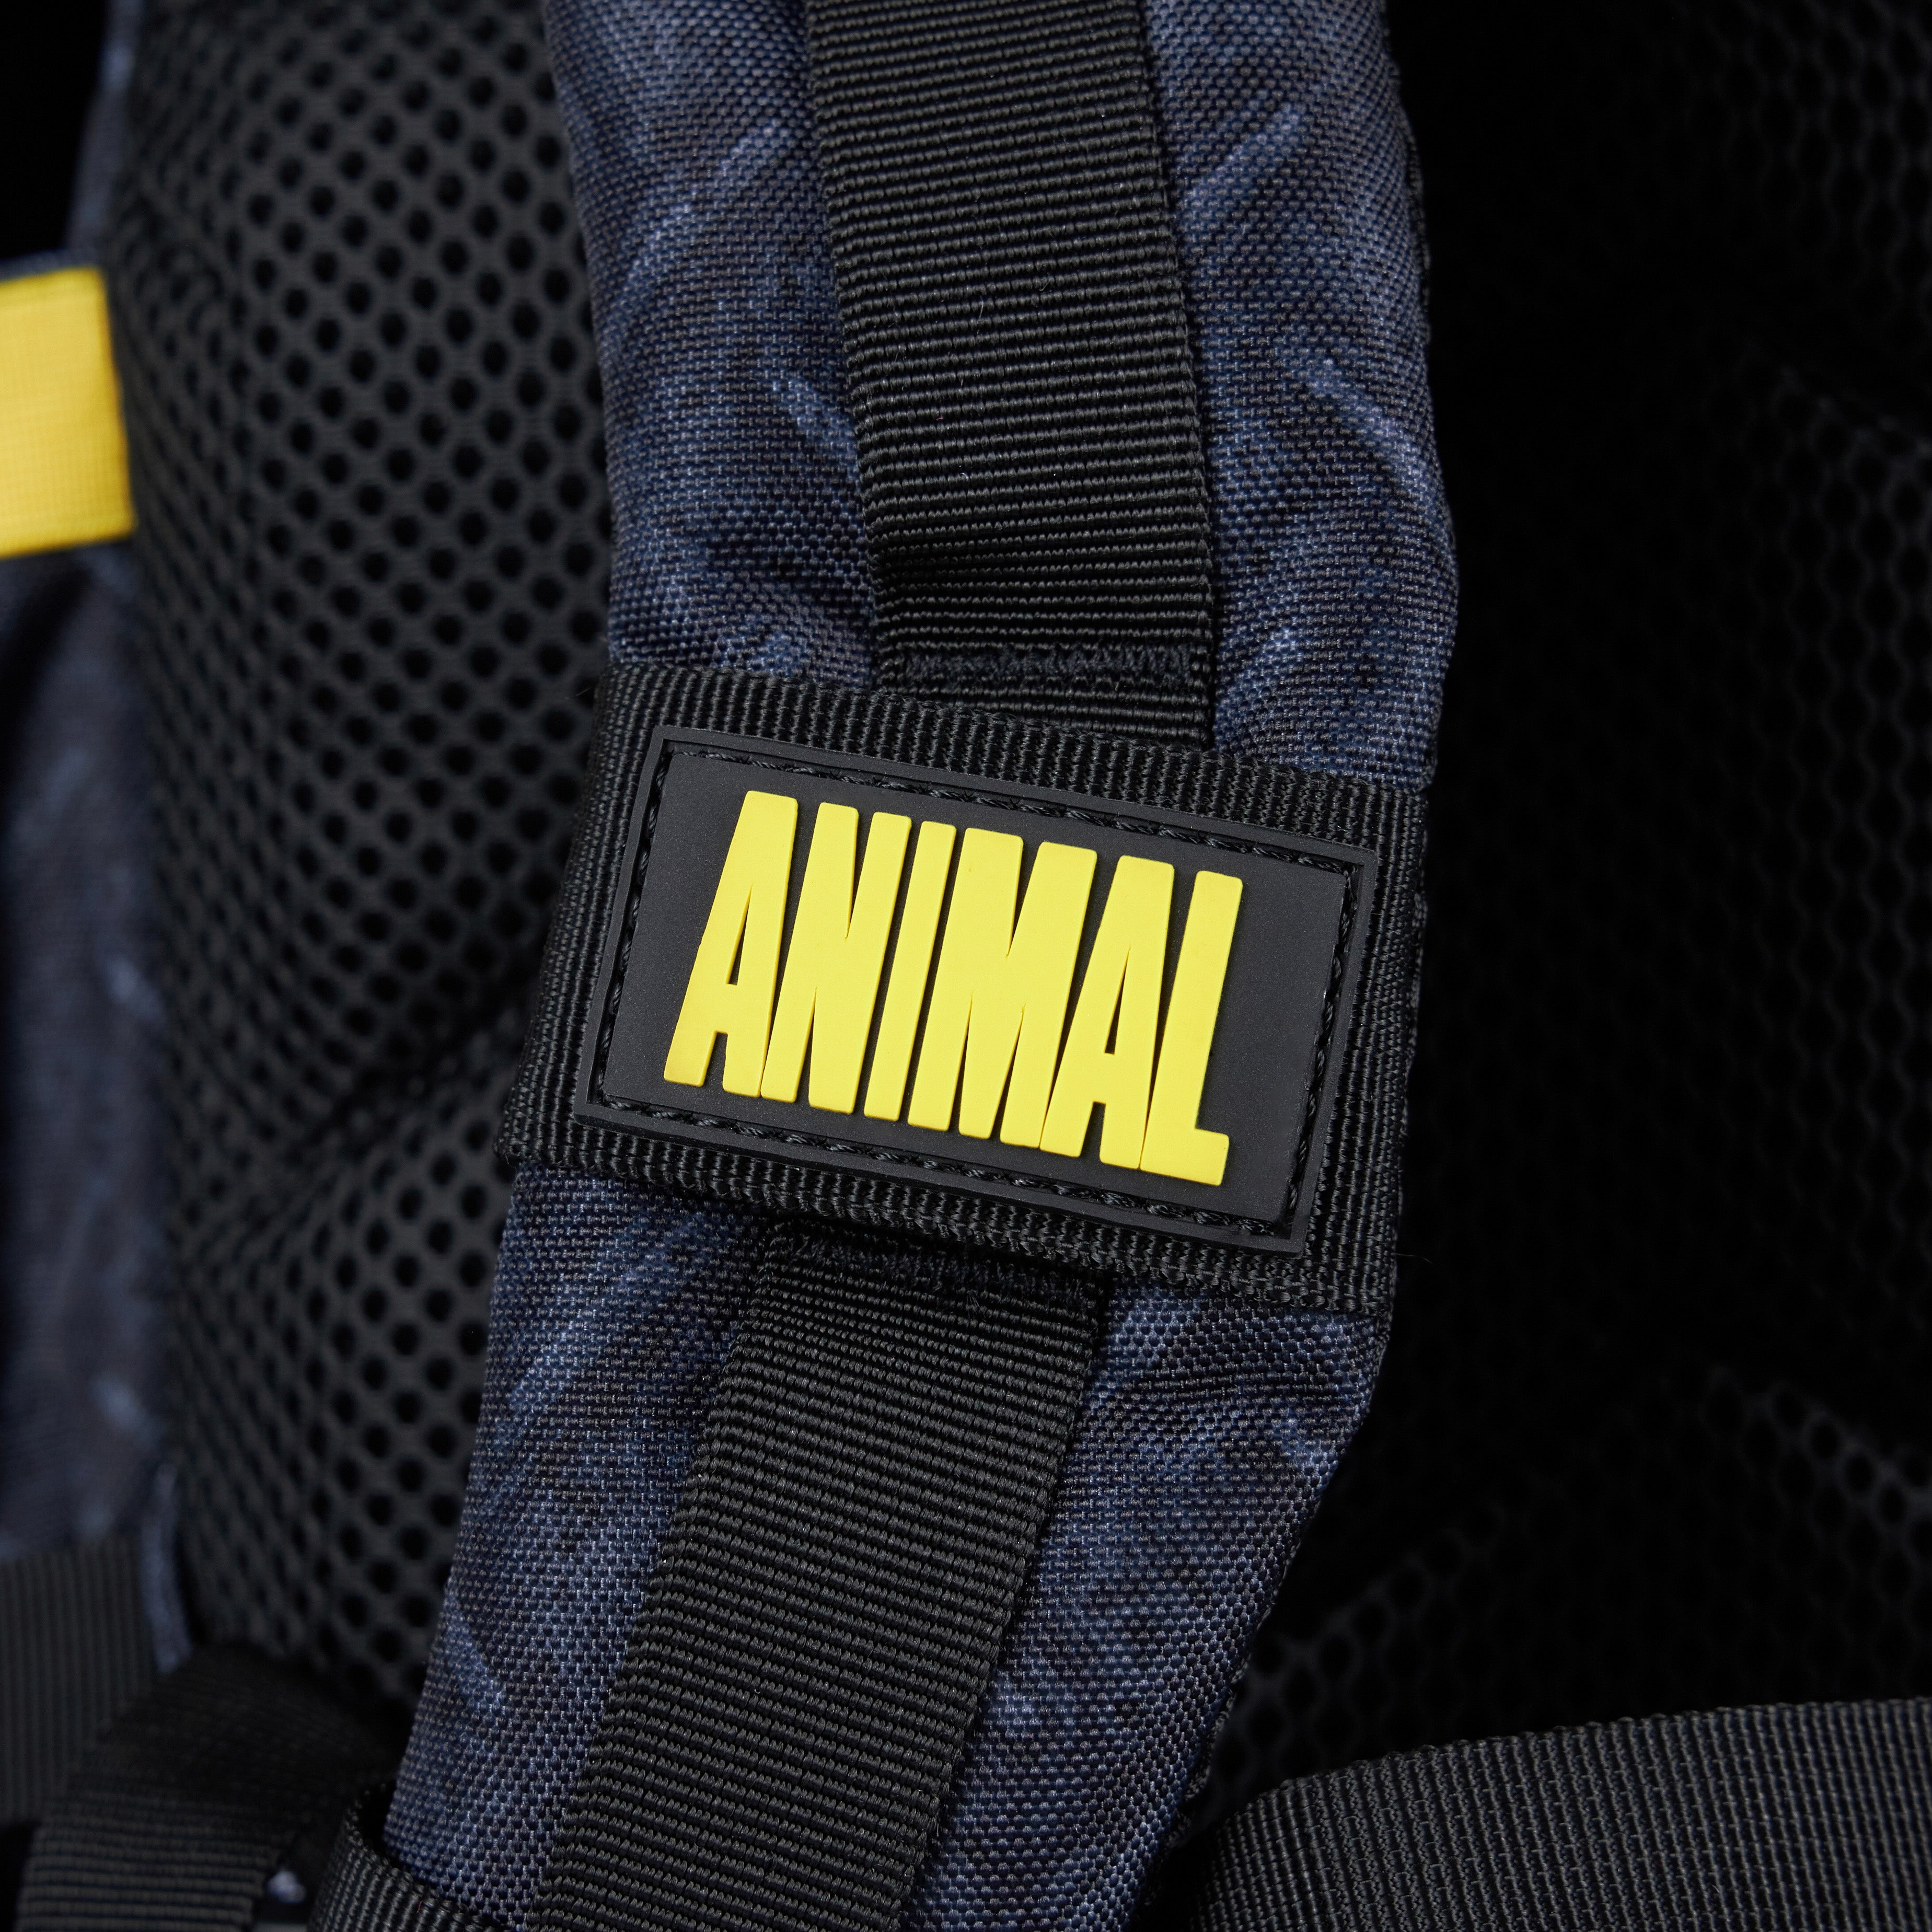 35L ANIMAL x WOLFpak Collaboration Backpack